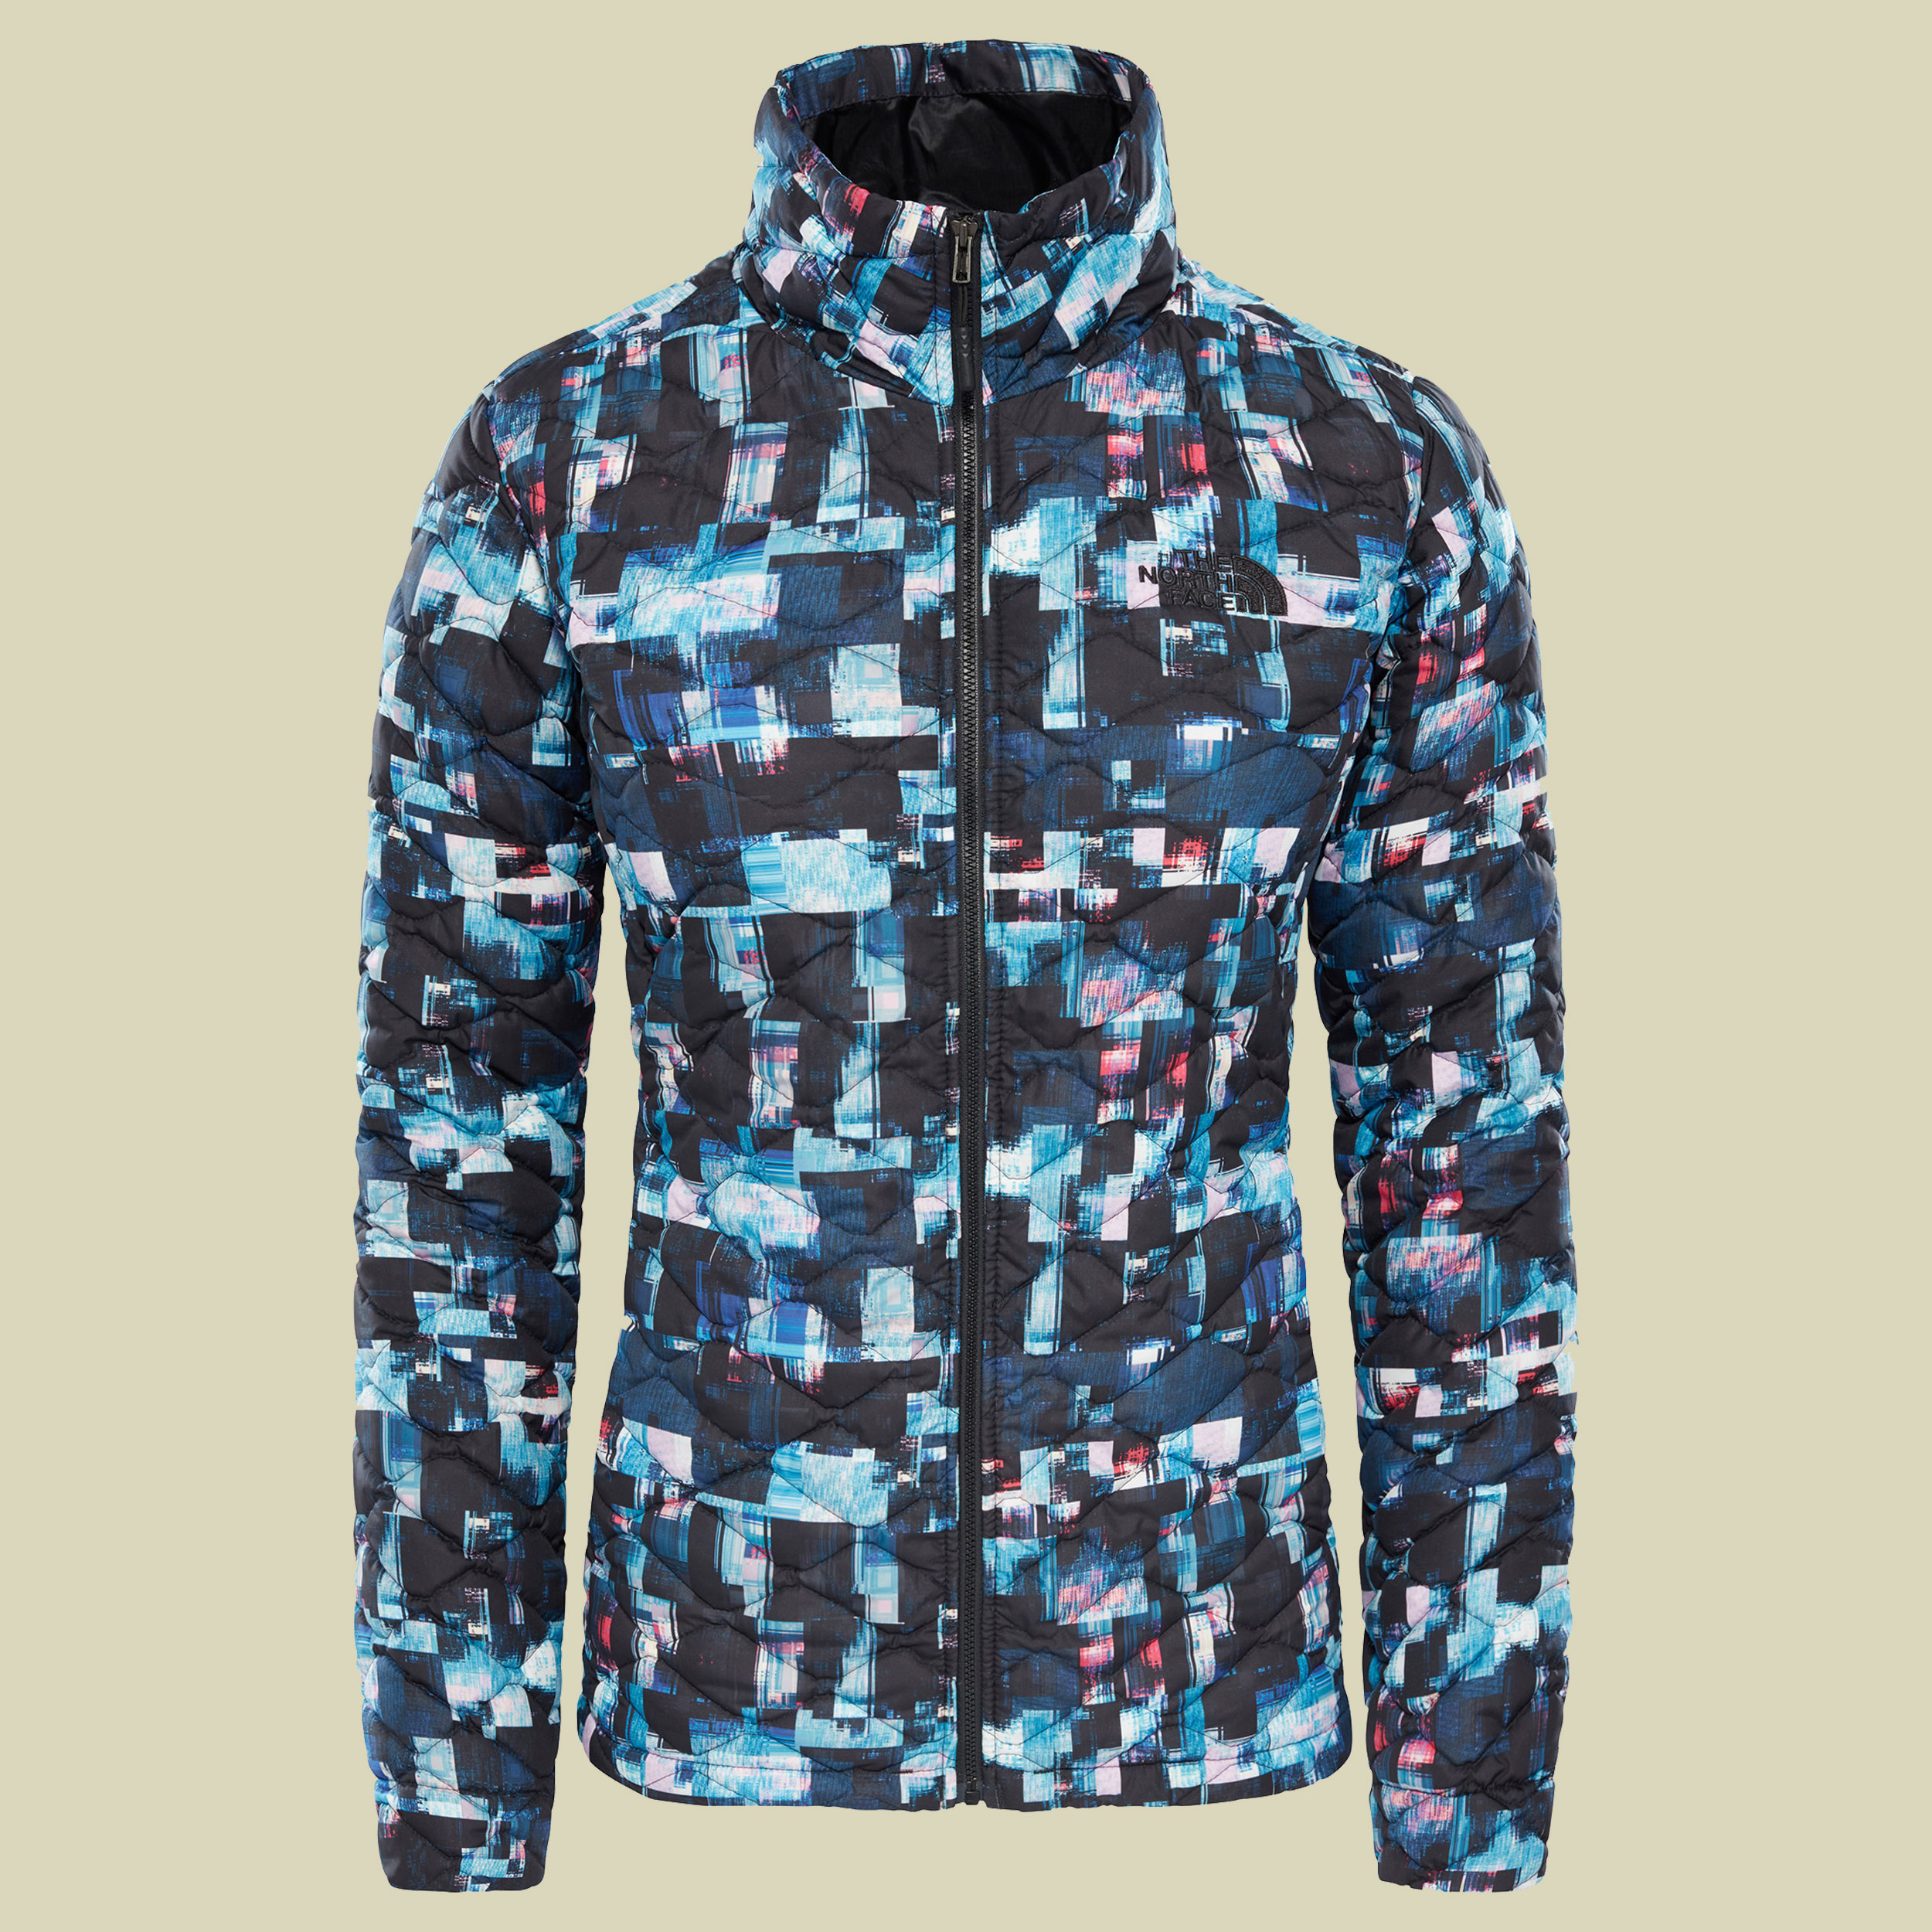 Thermoball Jacket Women